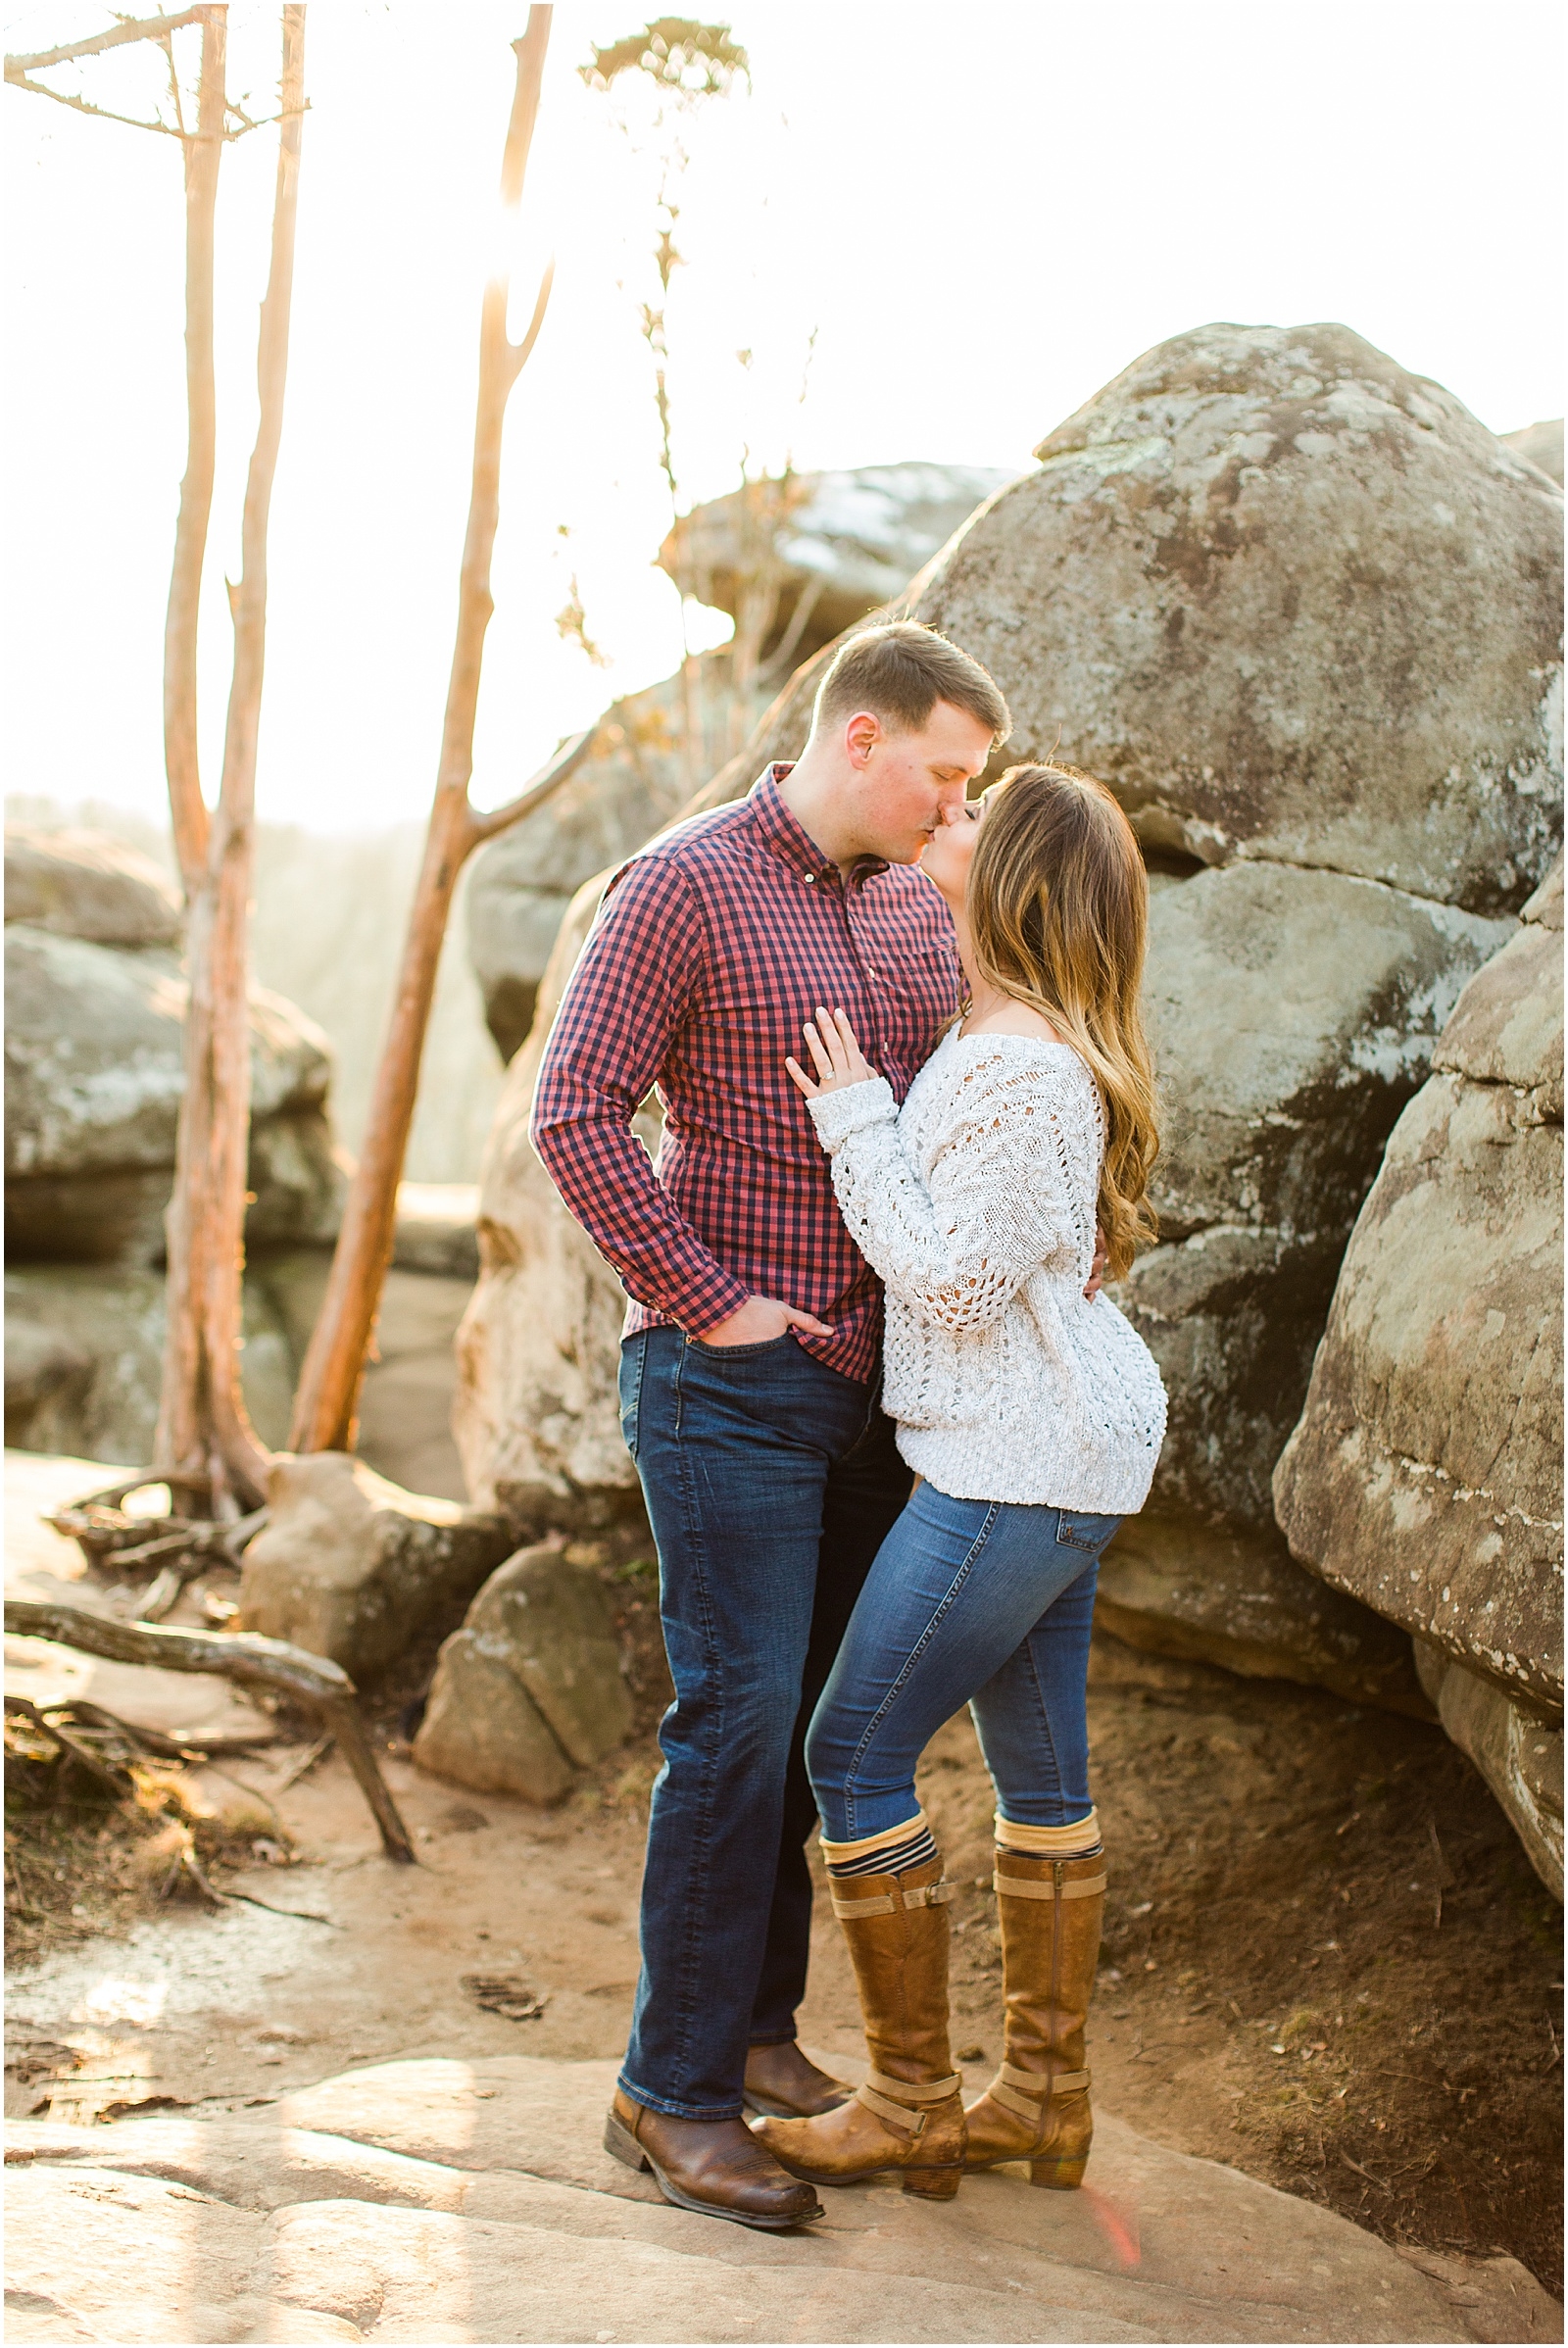 A Sunny Garden of the Gods Engagement Session | Shiloh and Lee | Bret and Brandie Photography051.jpg